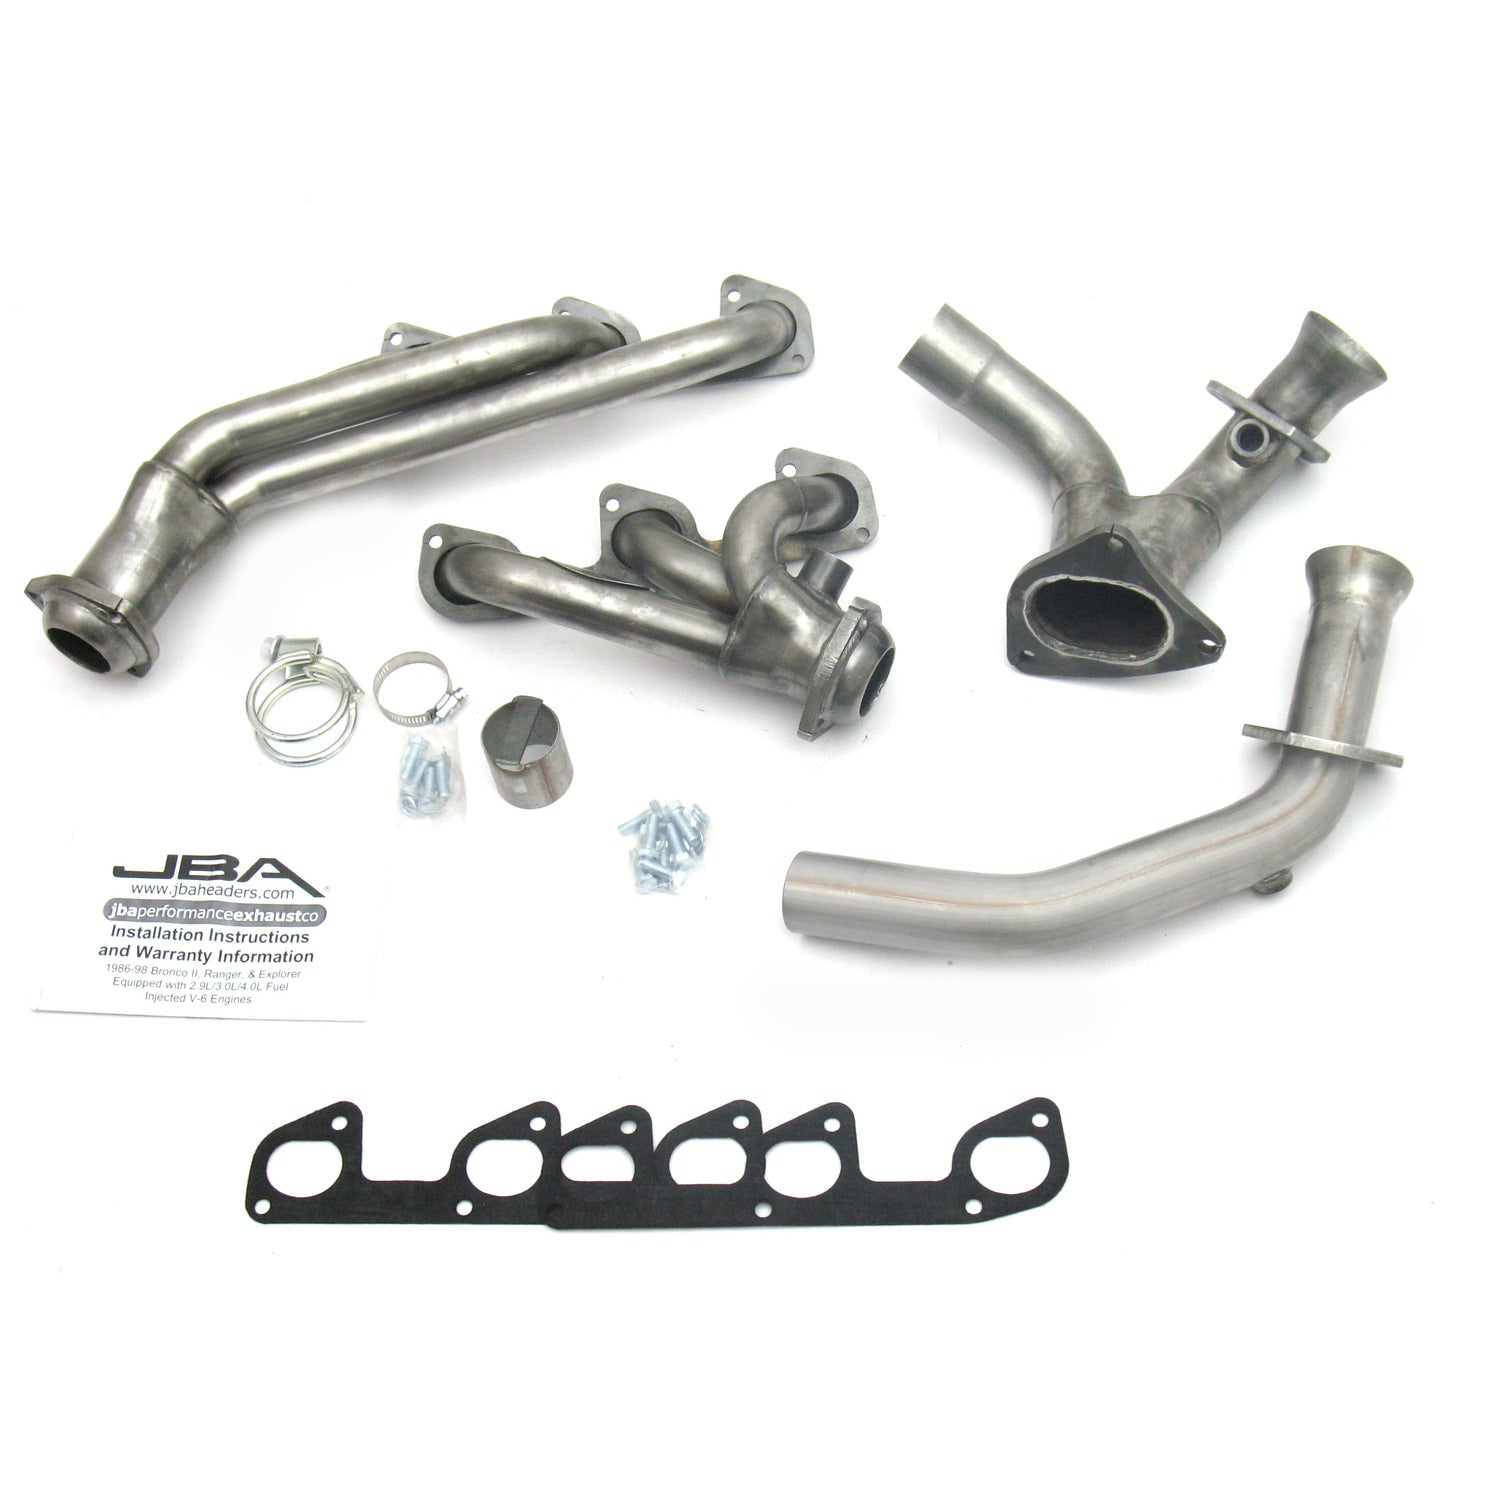 JBA Performance Exhaust 1634S 1 1/2" Header Shorty Stainless Steel 95-97 Ranger 4.0L V-6 Includes Y-Pipe